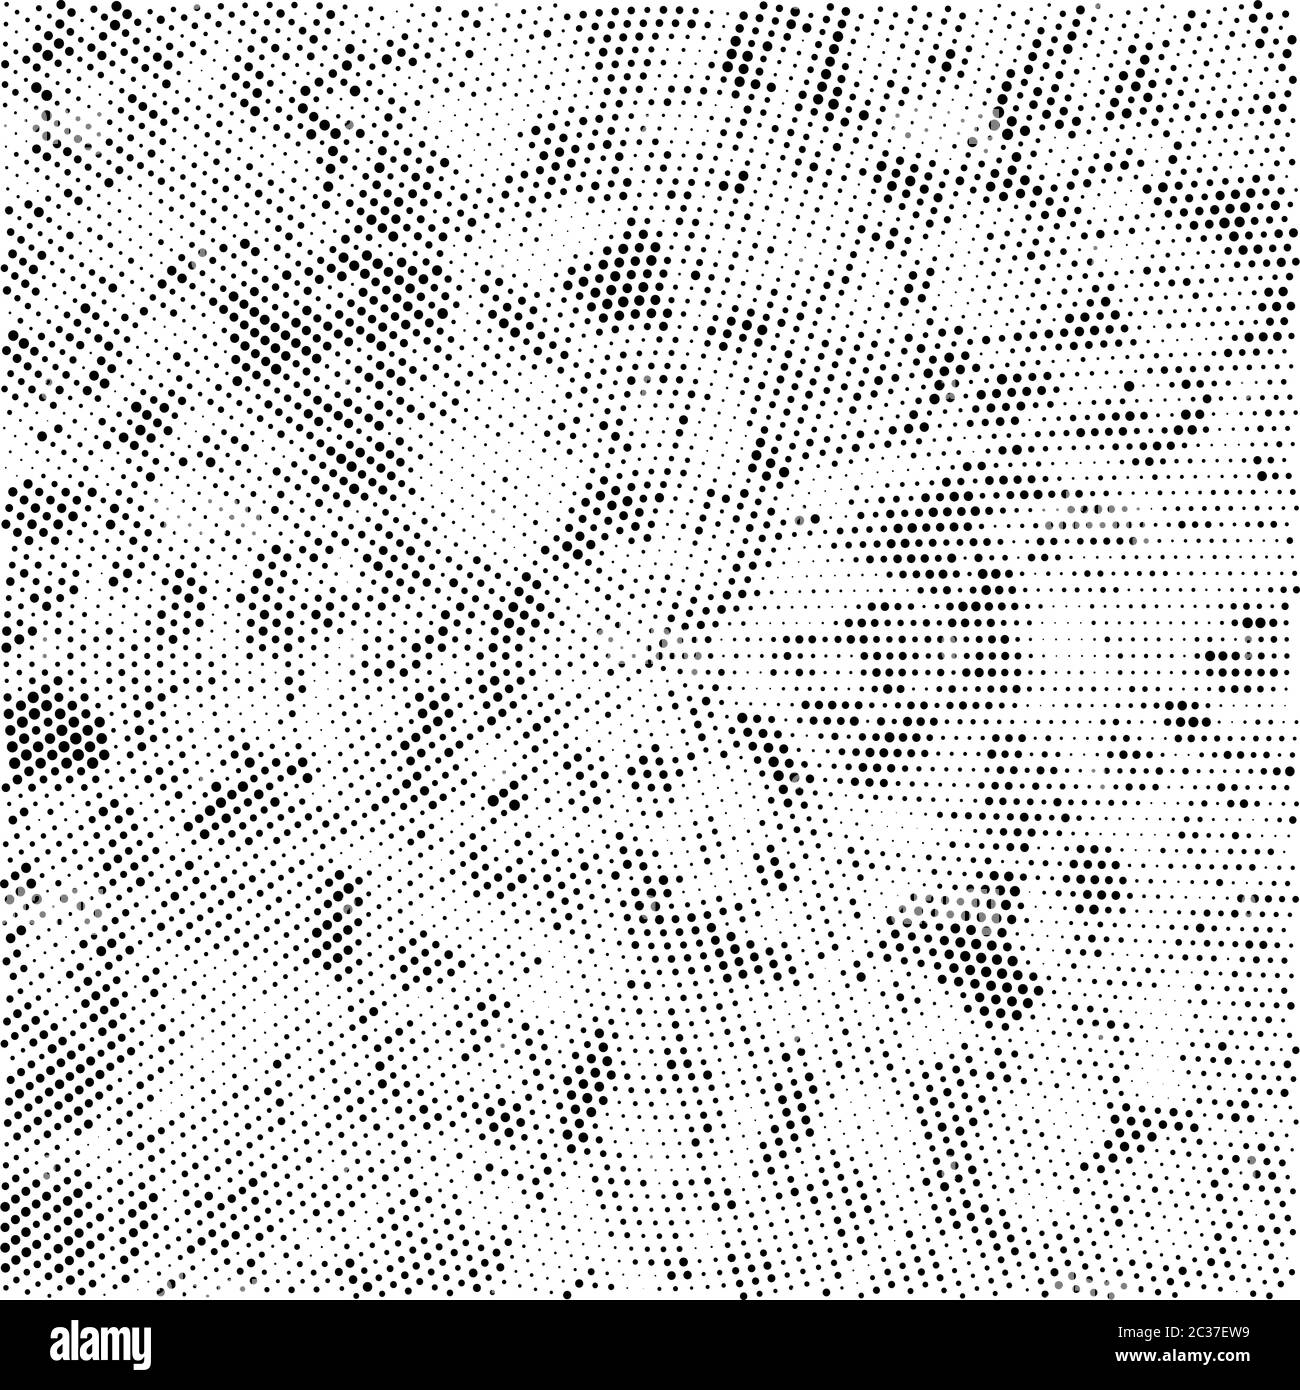 Halftone Pattern. Set of Dots. Dotted Texture on White Background. Overlay  Grunge Template. Distress Linear Design. Fade Monochrome Points. Pop Art Ba  Stock Photo - Alamy